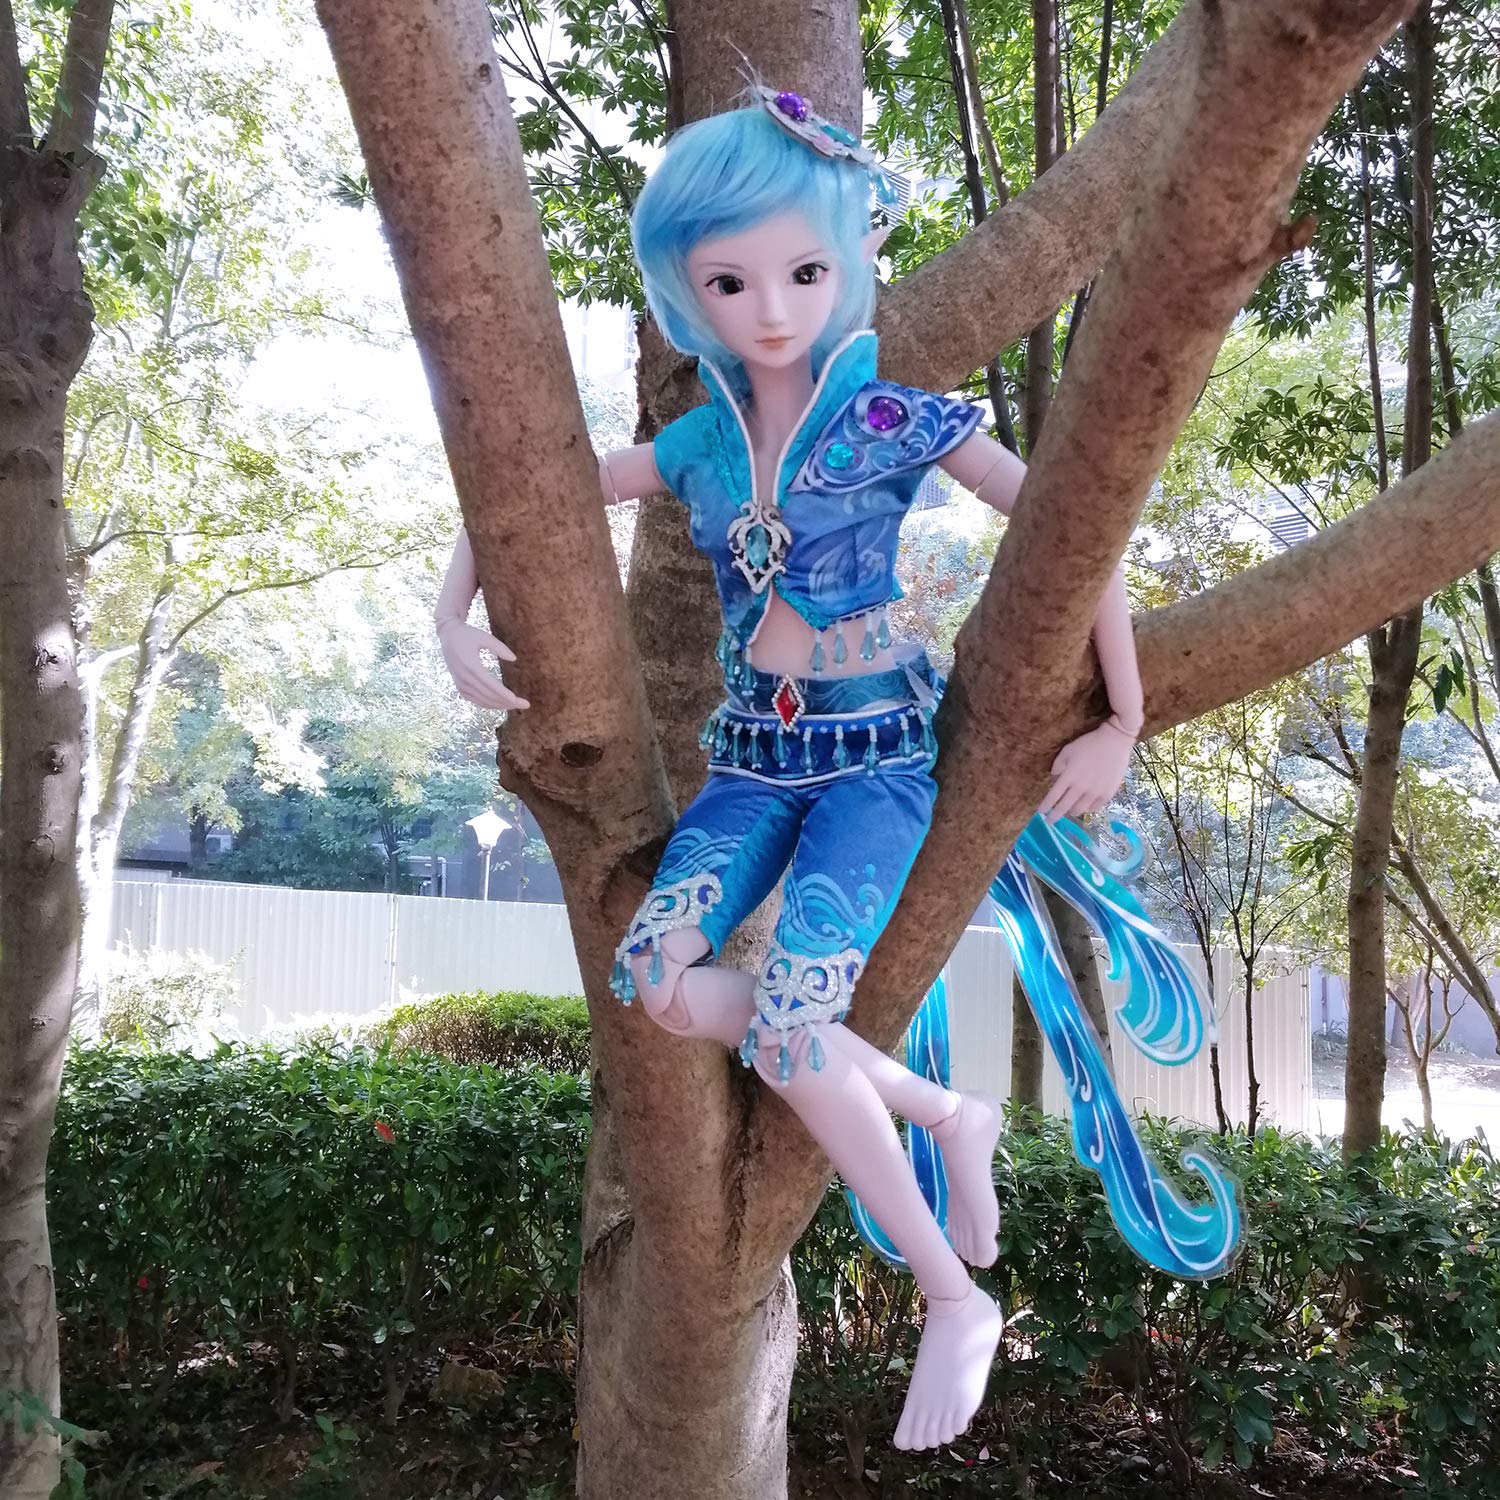 EVA BJD Water Prince Poseidon 1/3 BJD Doll Full Set 24inch 19 Ball Jointed Dolls Elf Ears + Clothes + Free Makeup + Hair + Accessories